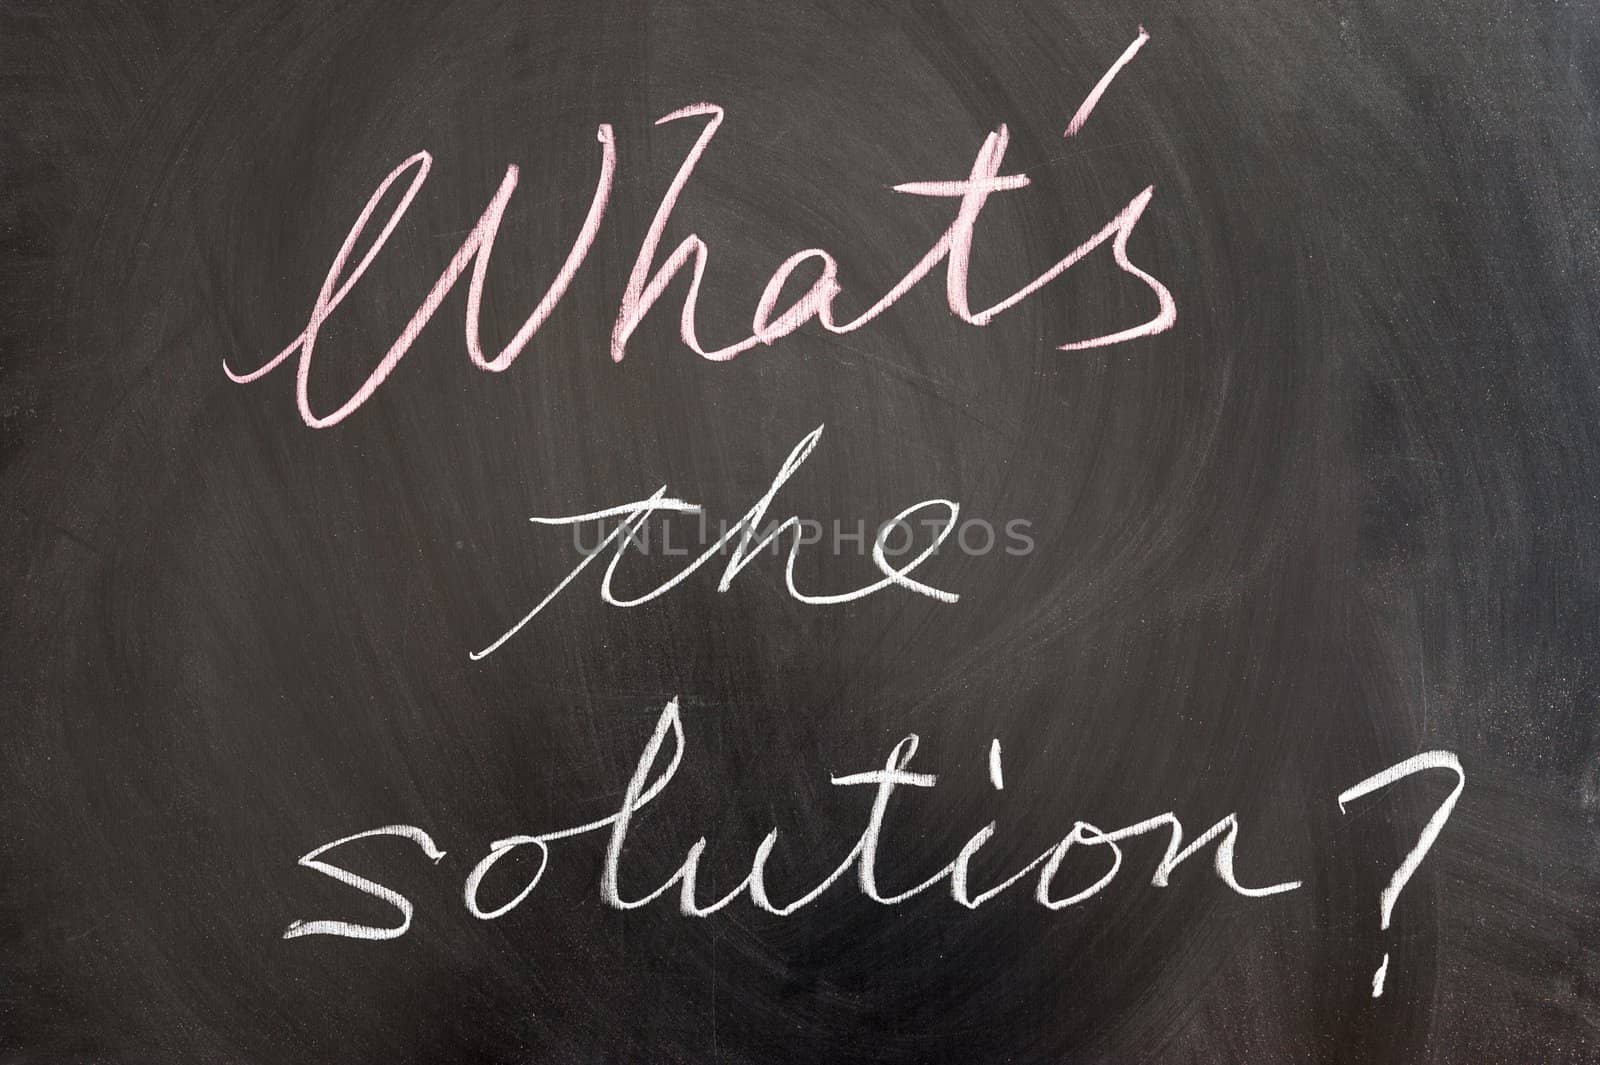 What's the solution words written on the blackboard